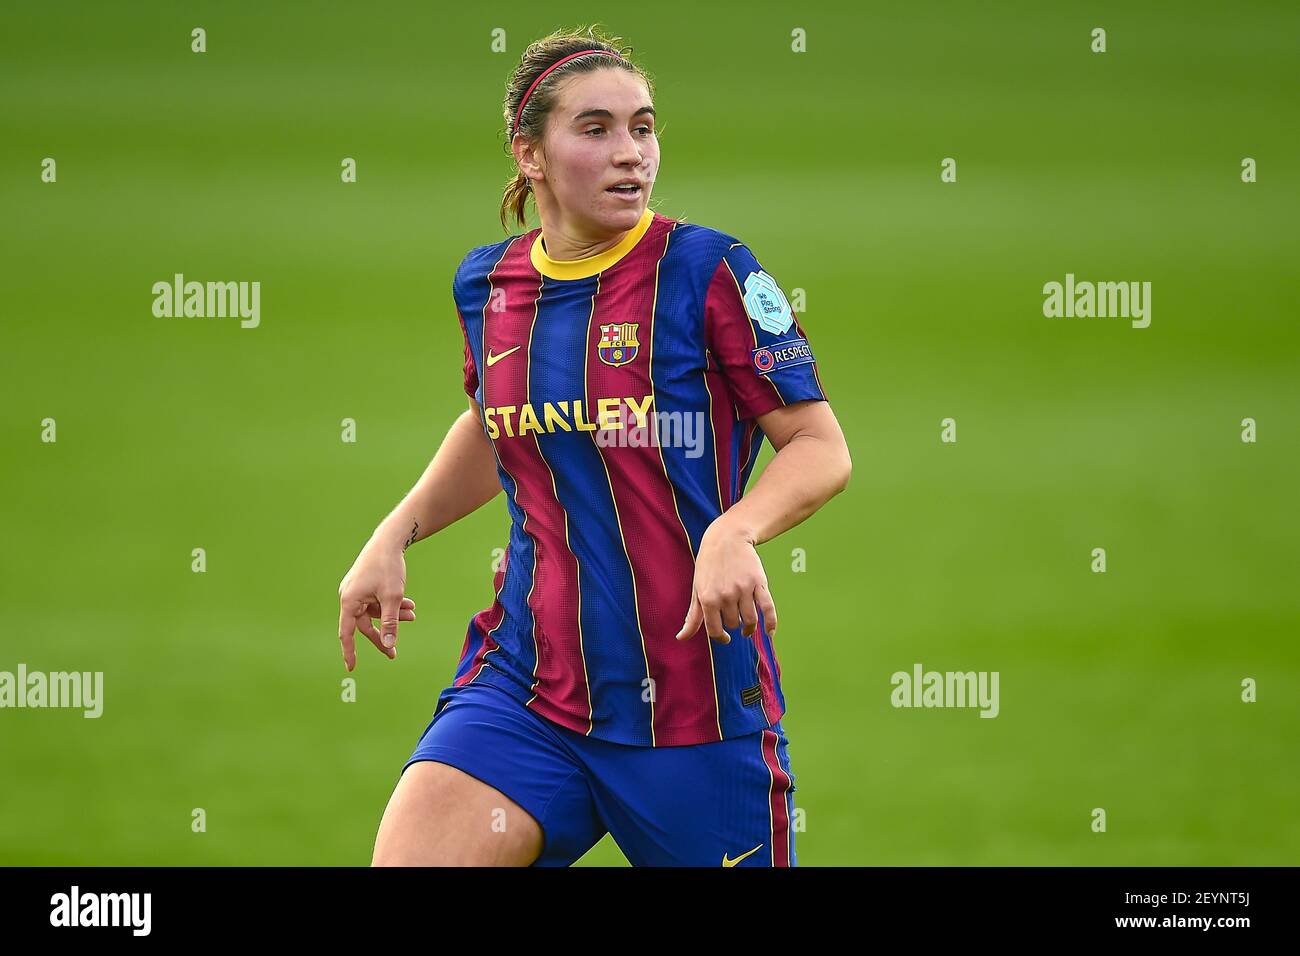 Patricia Guijarro of FC Barcelona during the Women's Champions League match  between FC Barcelona and Fortuna Hjorring played at Johan Cruyff Stadium on  March 3, 2021 in Barcelona, Spain. (Photo by PRESSINPHOTO